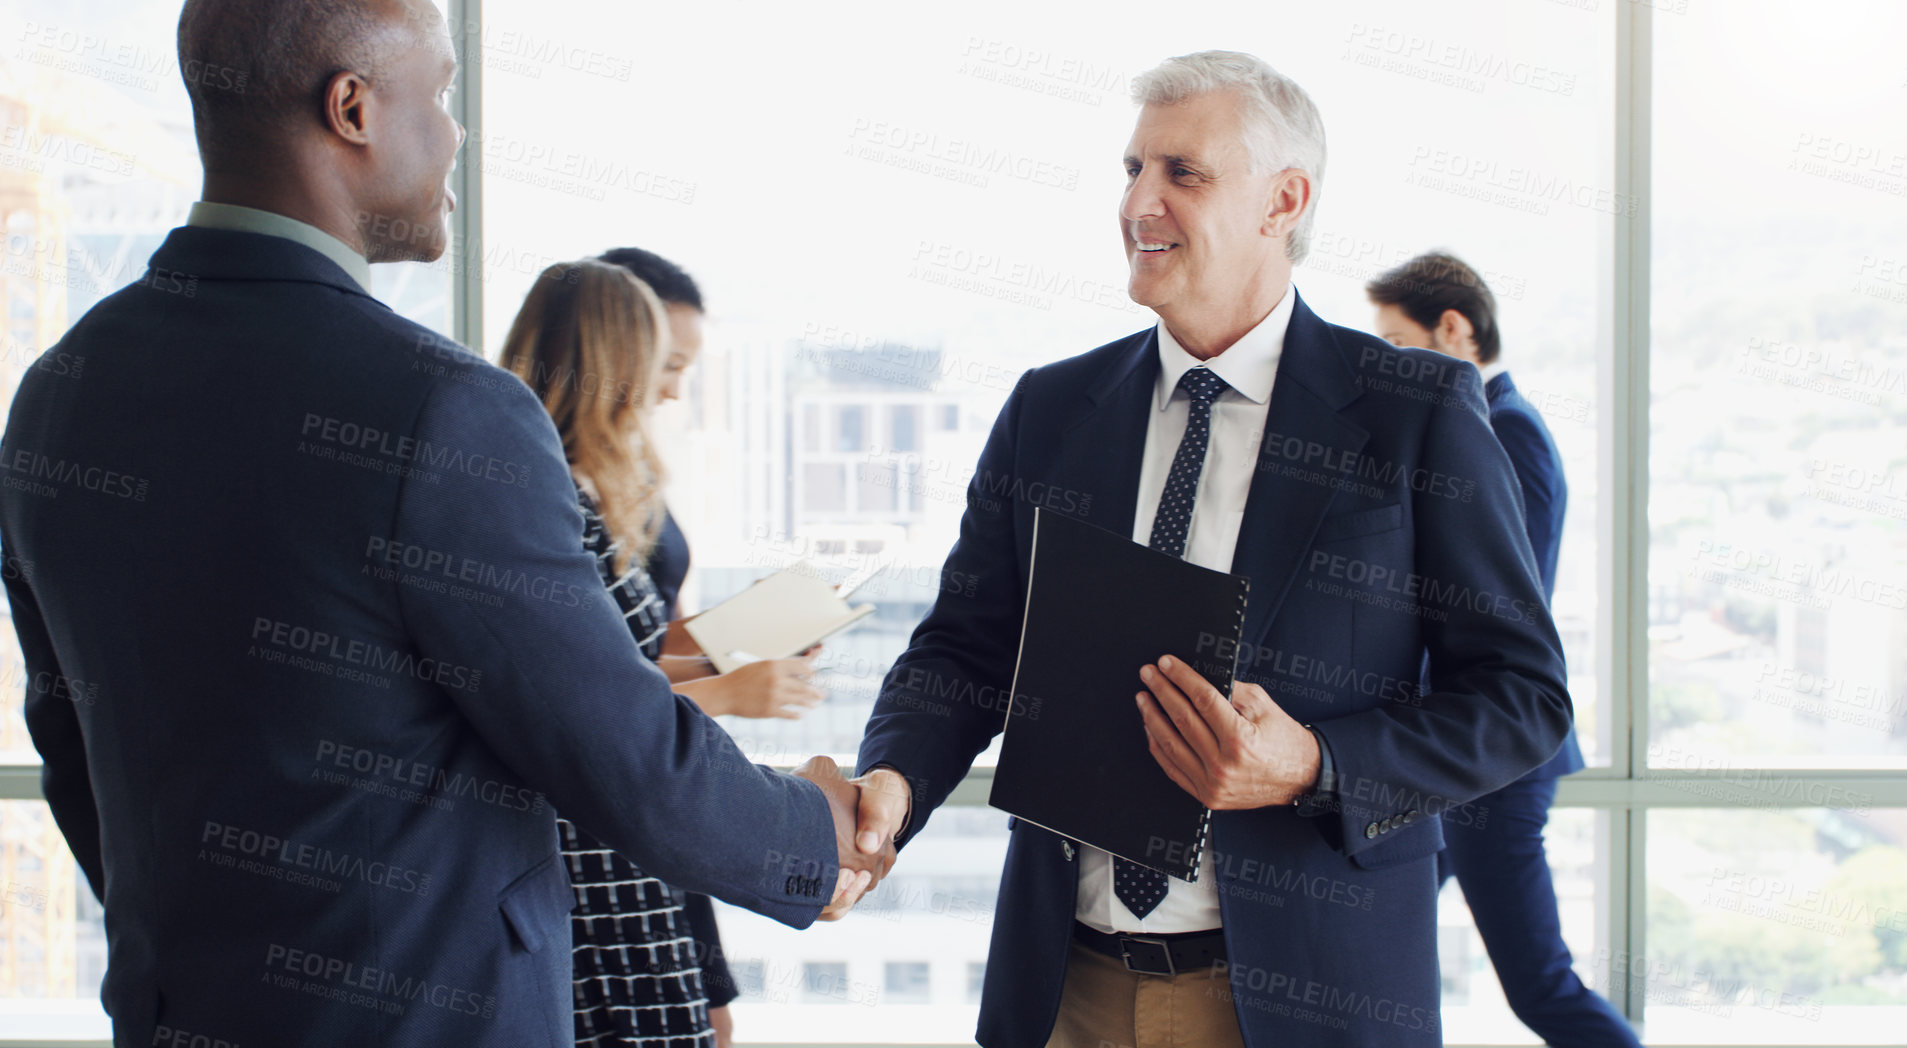 Buy stock photo Cropped shot of two businesspeople shaking hands while colleagues are blurred in the background